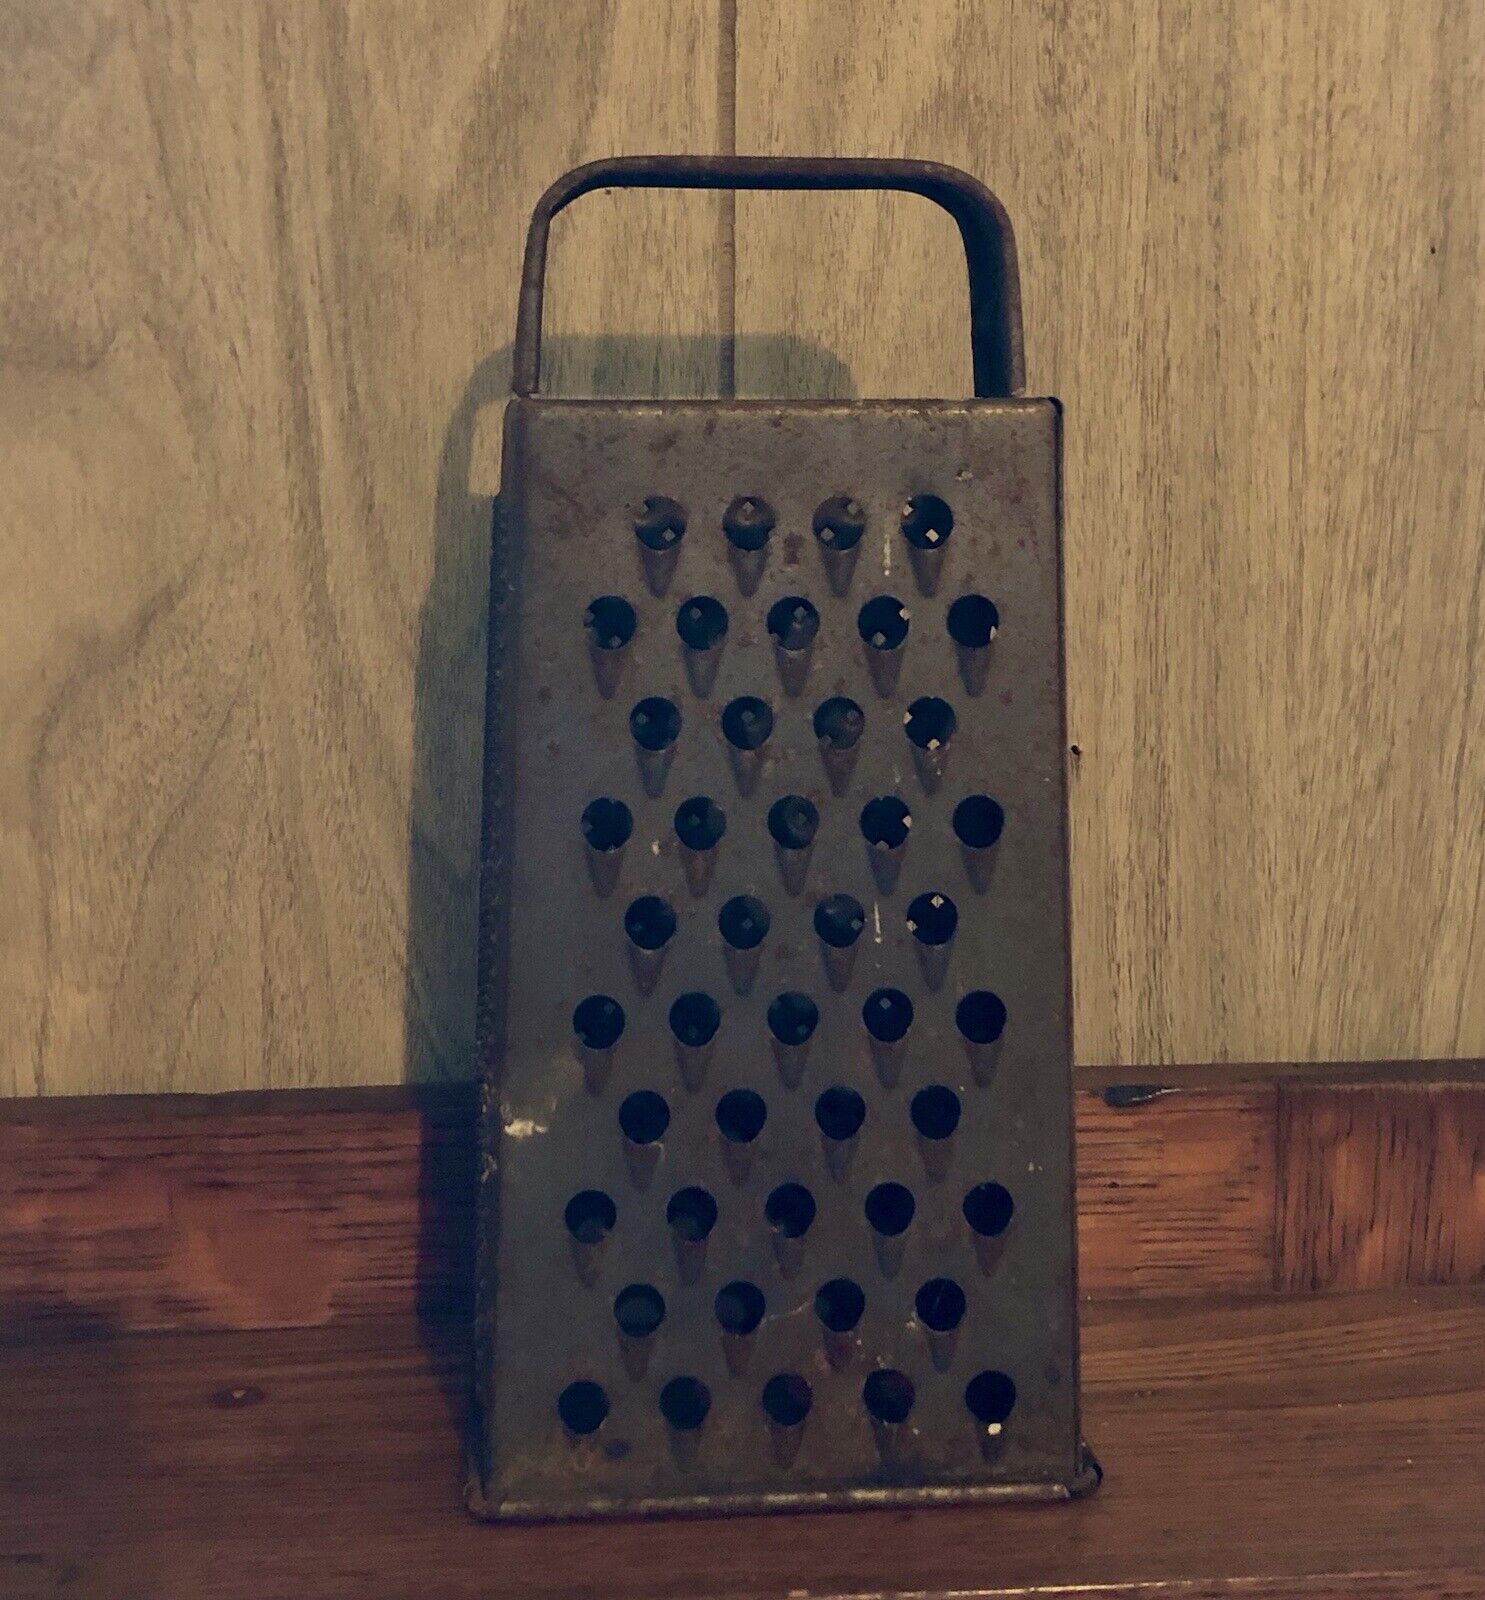 9015 Vtg Rusty Primitive Box Style Metal Food Grater Multiple Food Grater Styles